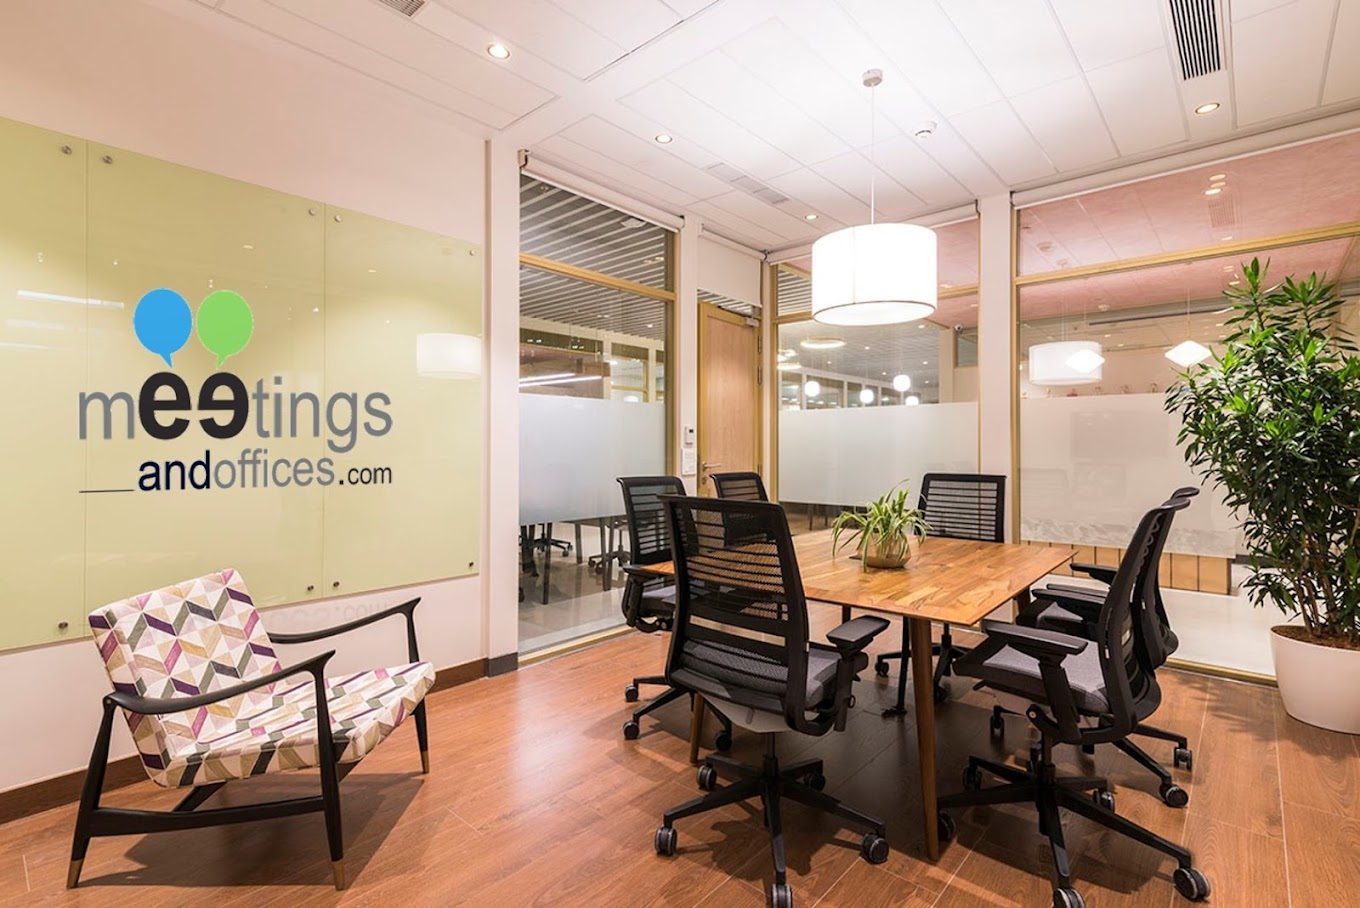 Meetings and Offices – Delhi